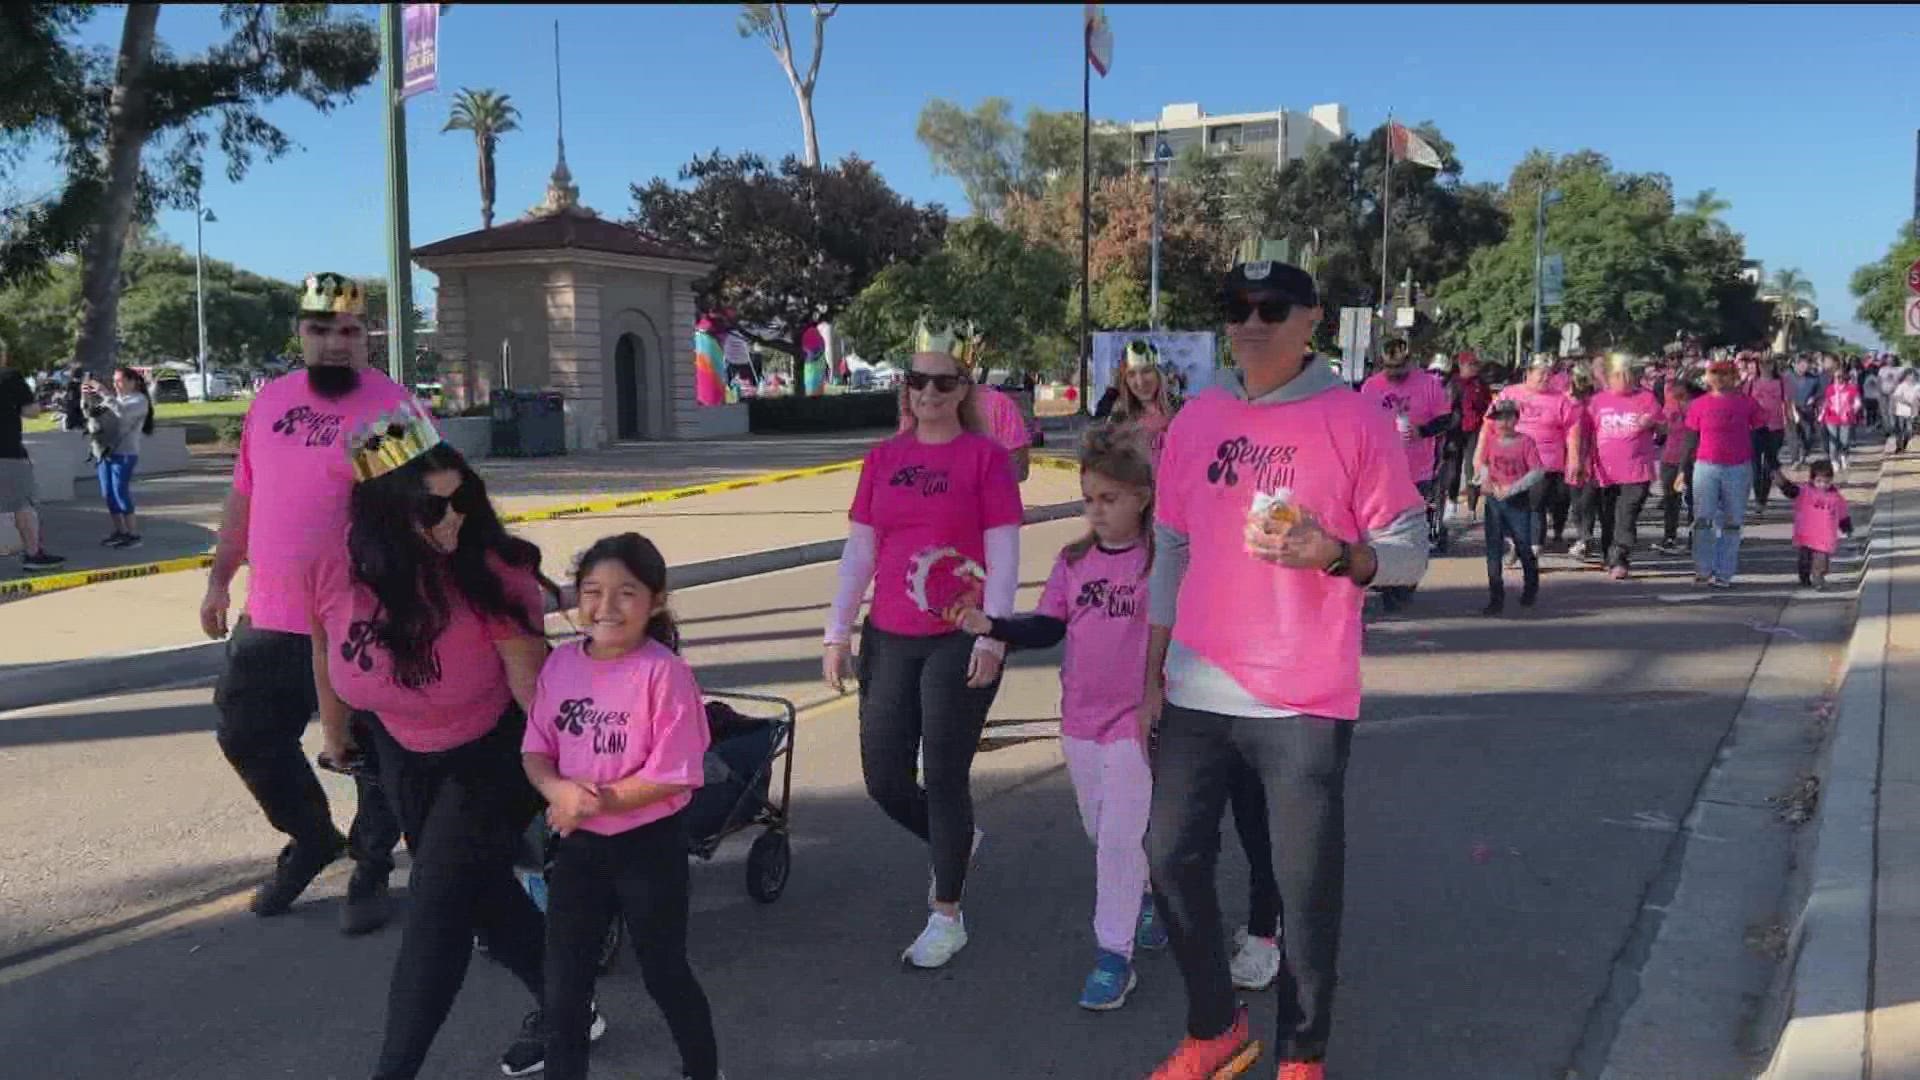 Thousands of breast cancer survivors and supporters walked 2.2 miles in a sea of pink through the heart of Balboa Park.